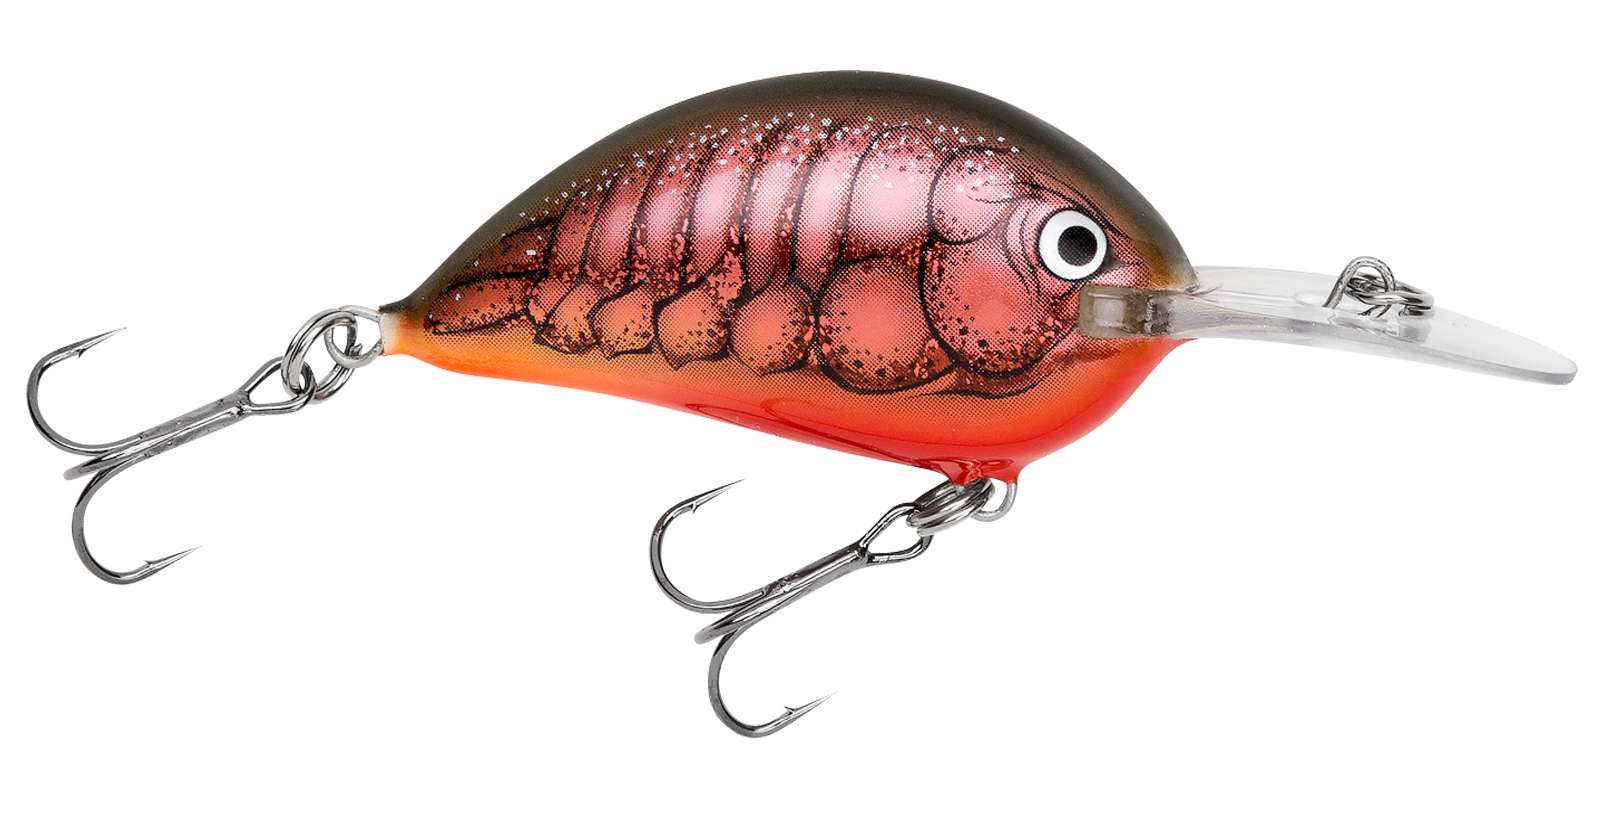 <p><b>Bagley</b><br />
	Sunny B<br />
	Bagley is adding the Sunny B to its line of balsa and hard-plastic lures. Made with Bagley's heat compression molding process, the Sunny B is 2 inches long and comes in a 3/8-ounce model. Comes in two lip variations for shallow or deep cranking and 13 bass-attracting colors.</p>
